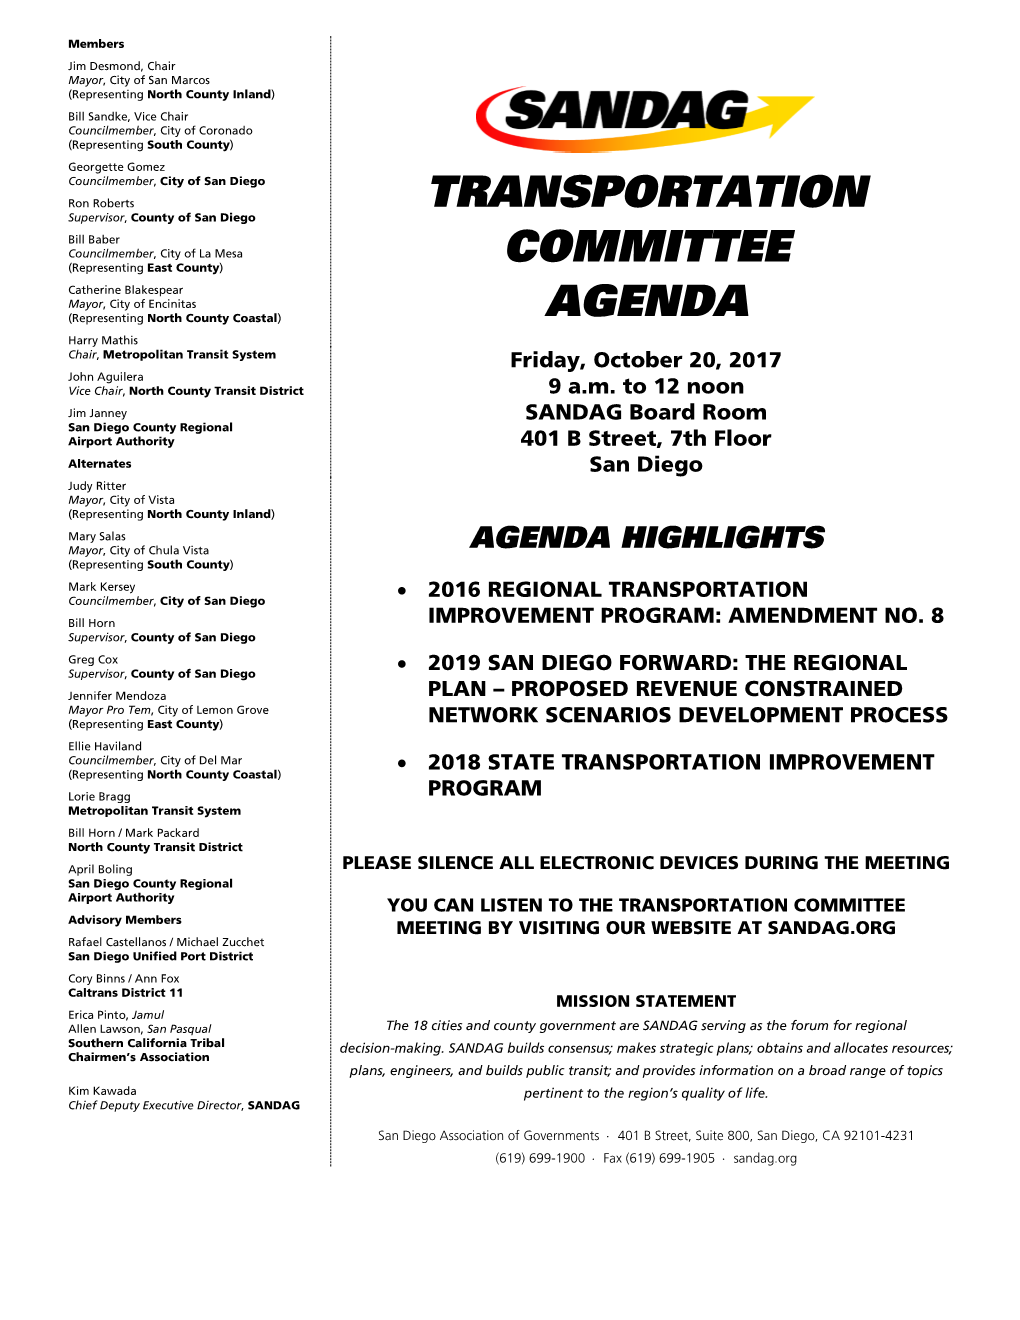 AGENDA Harry Mathis Chair, Metropolitan Transit System Friday, October 20, 2017 John Aguilera Vice Chair, North County Transit District 9 A.M